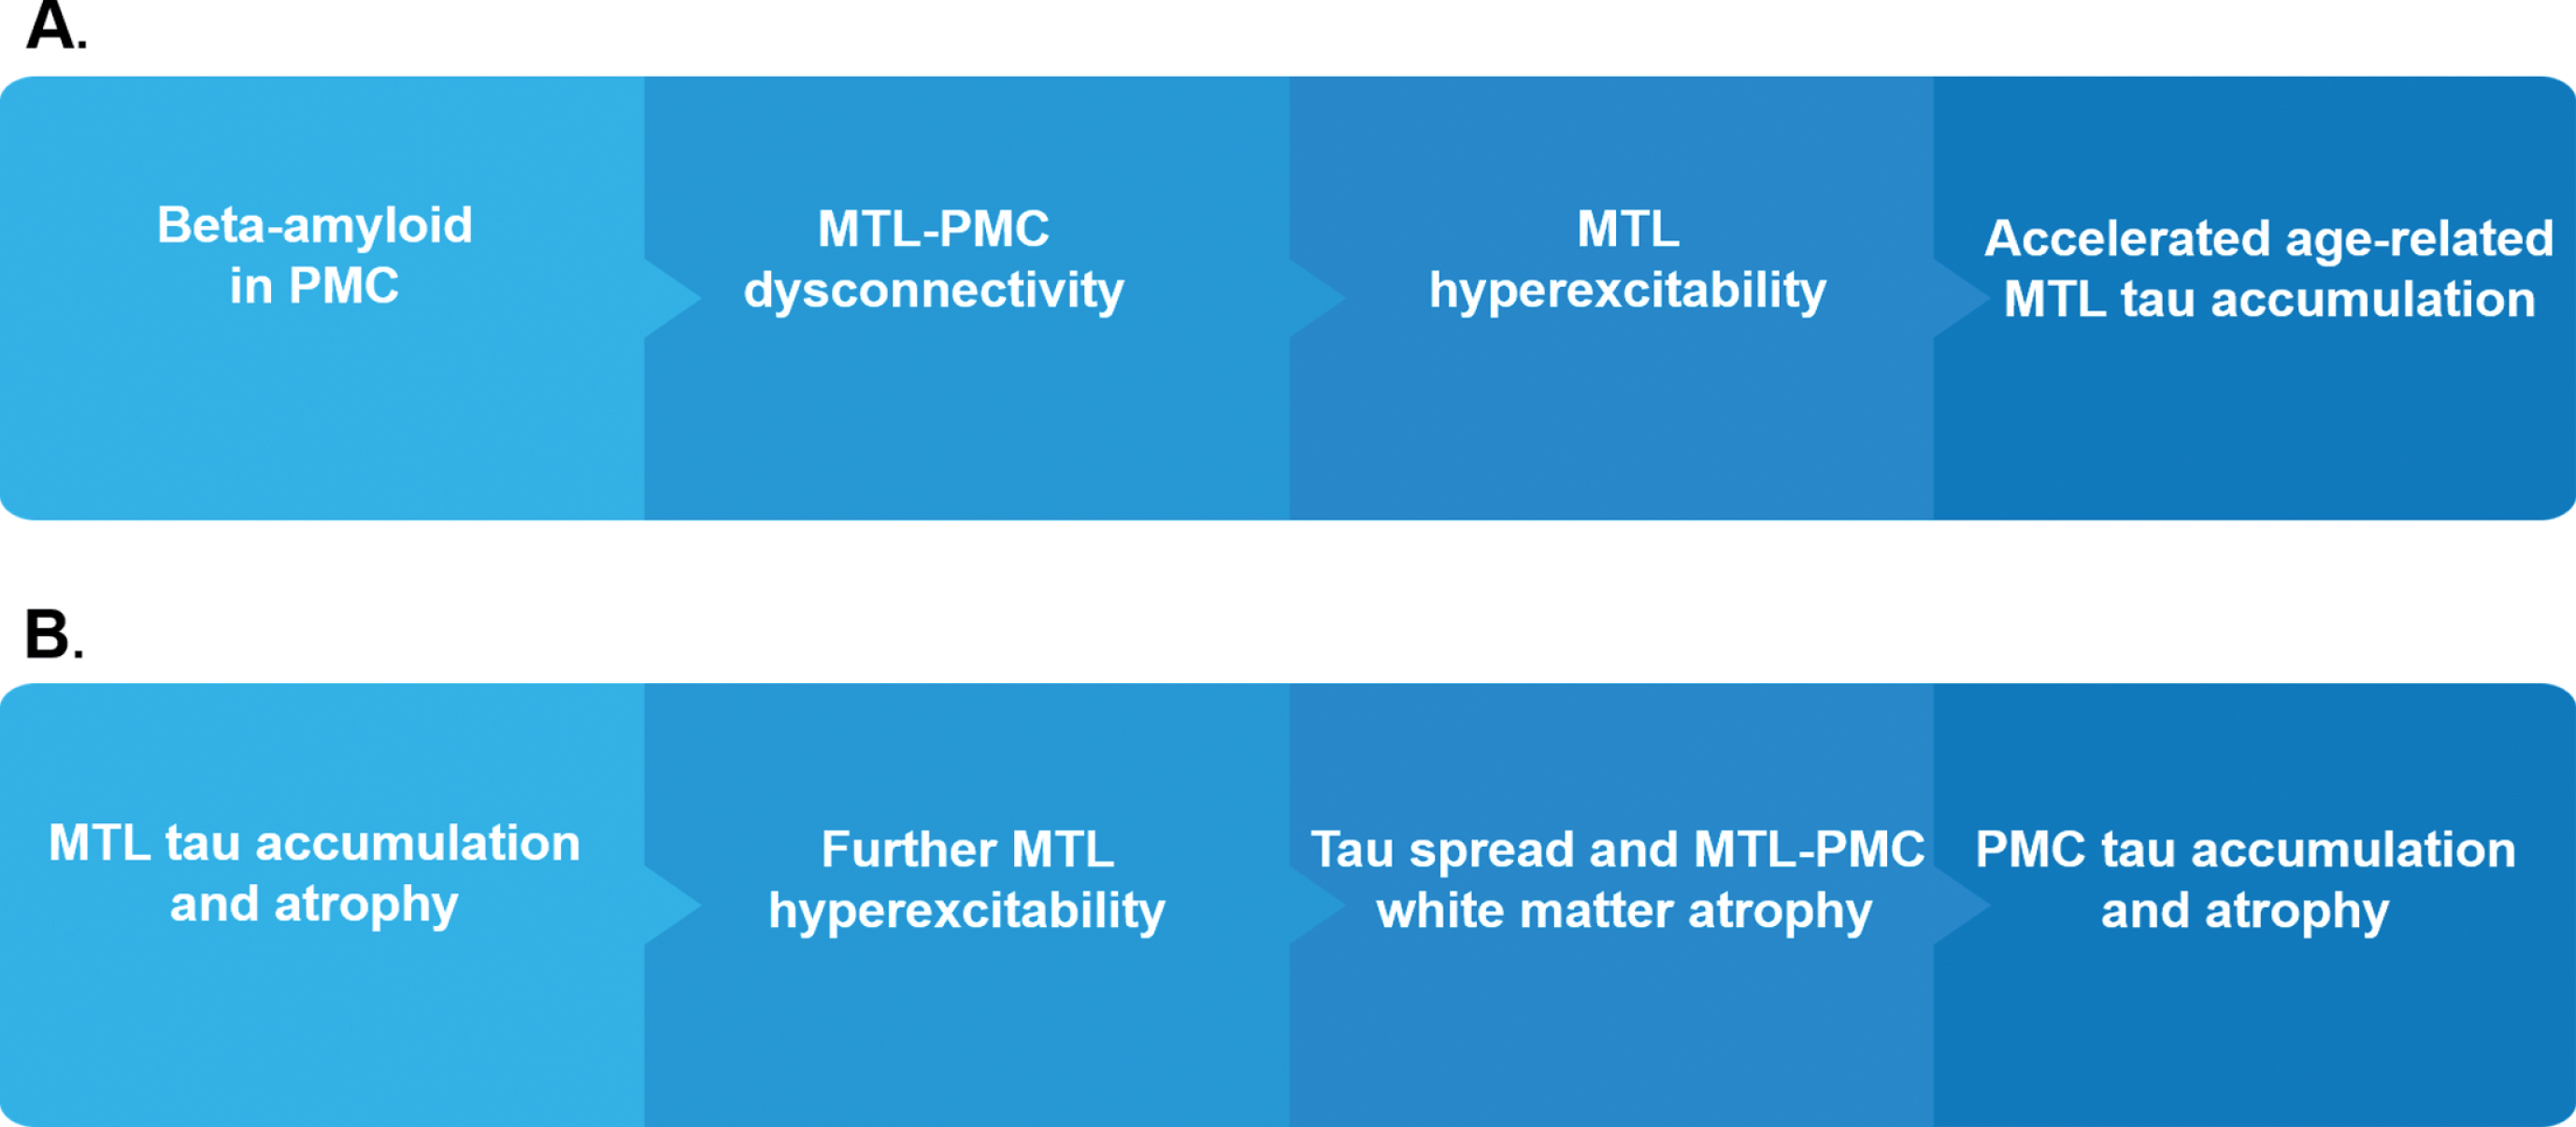 AD model linking MTL-PMC disconnection and MTL circuit hyperexcitability with tau and amyloid-β pathology. The sequence of events schematized in panels A and B are complementary and do not mutually exclude each other. A) At initial disease stages, amyloid-β pathology impairs the normal information flow between the MTL and PMC by driving functional and structural dysconnectivity between the PMC and the MTL, which results in disinhibition of the local MTL circuit and local MTL hyperactivity and hyperconnectivity during task and rest. MTL circuit hyperexcitability is the driving force accelerating age-related tau accumulation and atrophy in the MTL. B) Tau accumulation and atrophy in the MTL increase levels of local MTL circuit hyperexcitability, resulting in additional tau accumulation and facilitating subsequent tau spread out from the MTL to the PMC. Tau spread from the MTL to the PMC leads to advanced MTL-PMC disconnection through degeneration of white-matter tracts, eventually followed by cortical atrophy of the PMC. MTL, medial temporal lobes; PMC, parietomedial cortex.